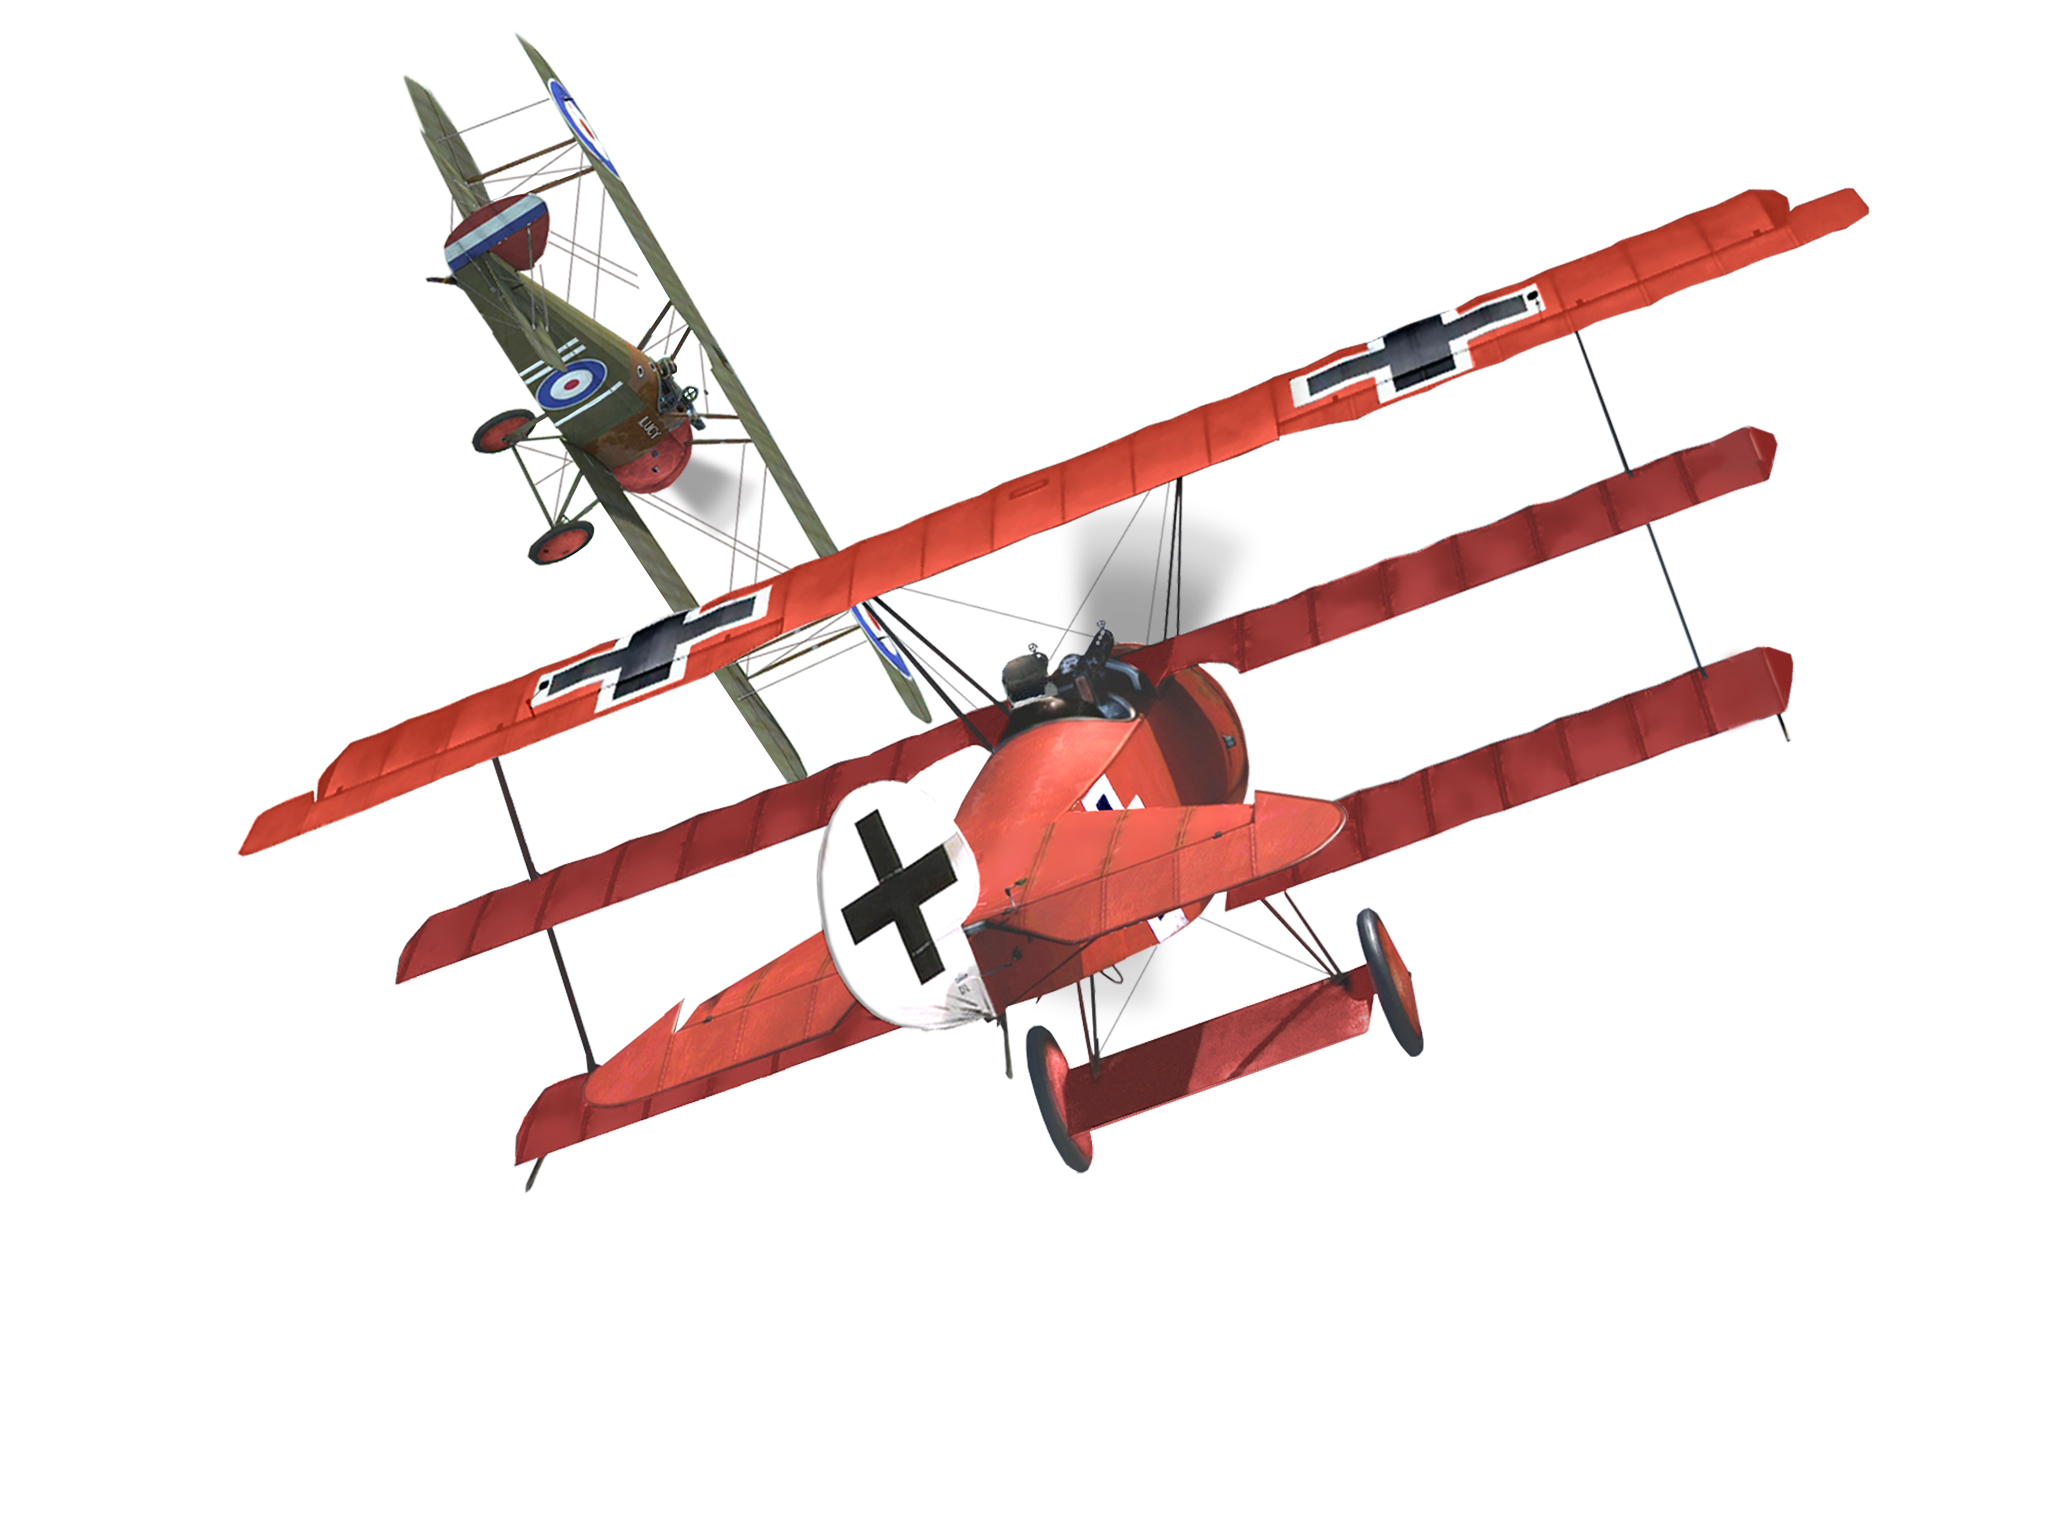 SNOOPY v RED BARON by Modular